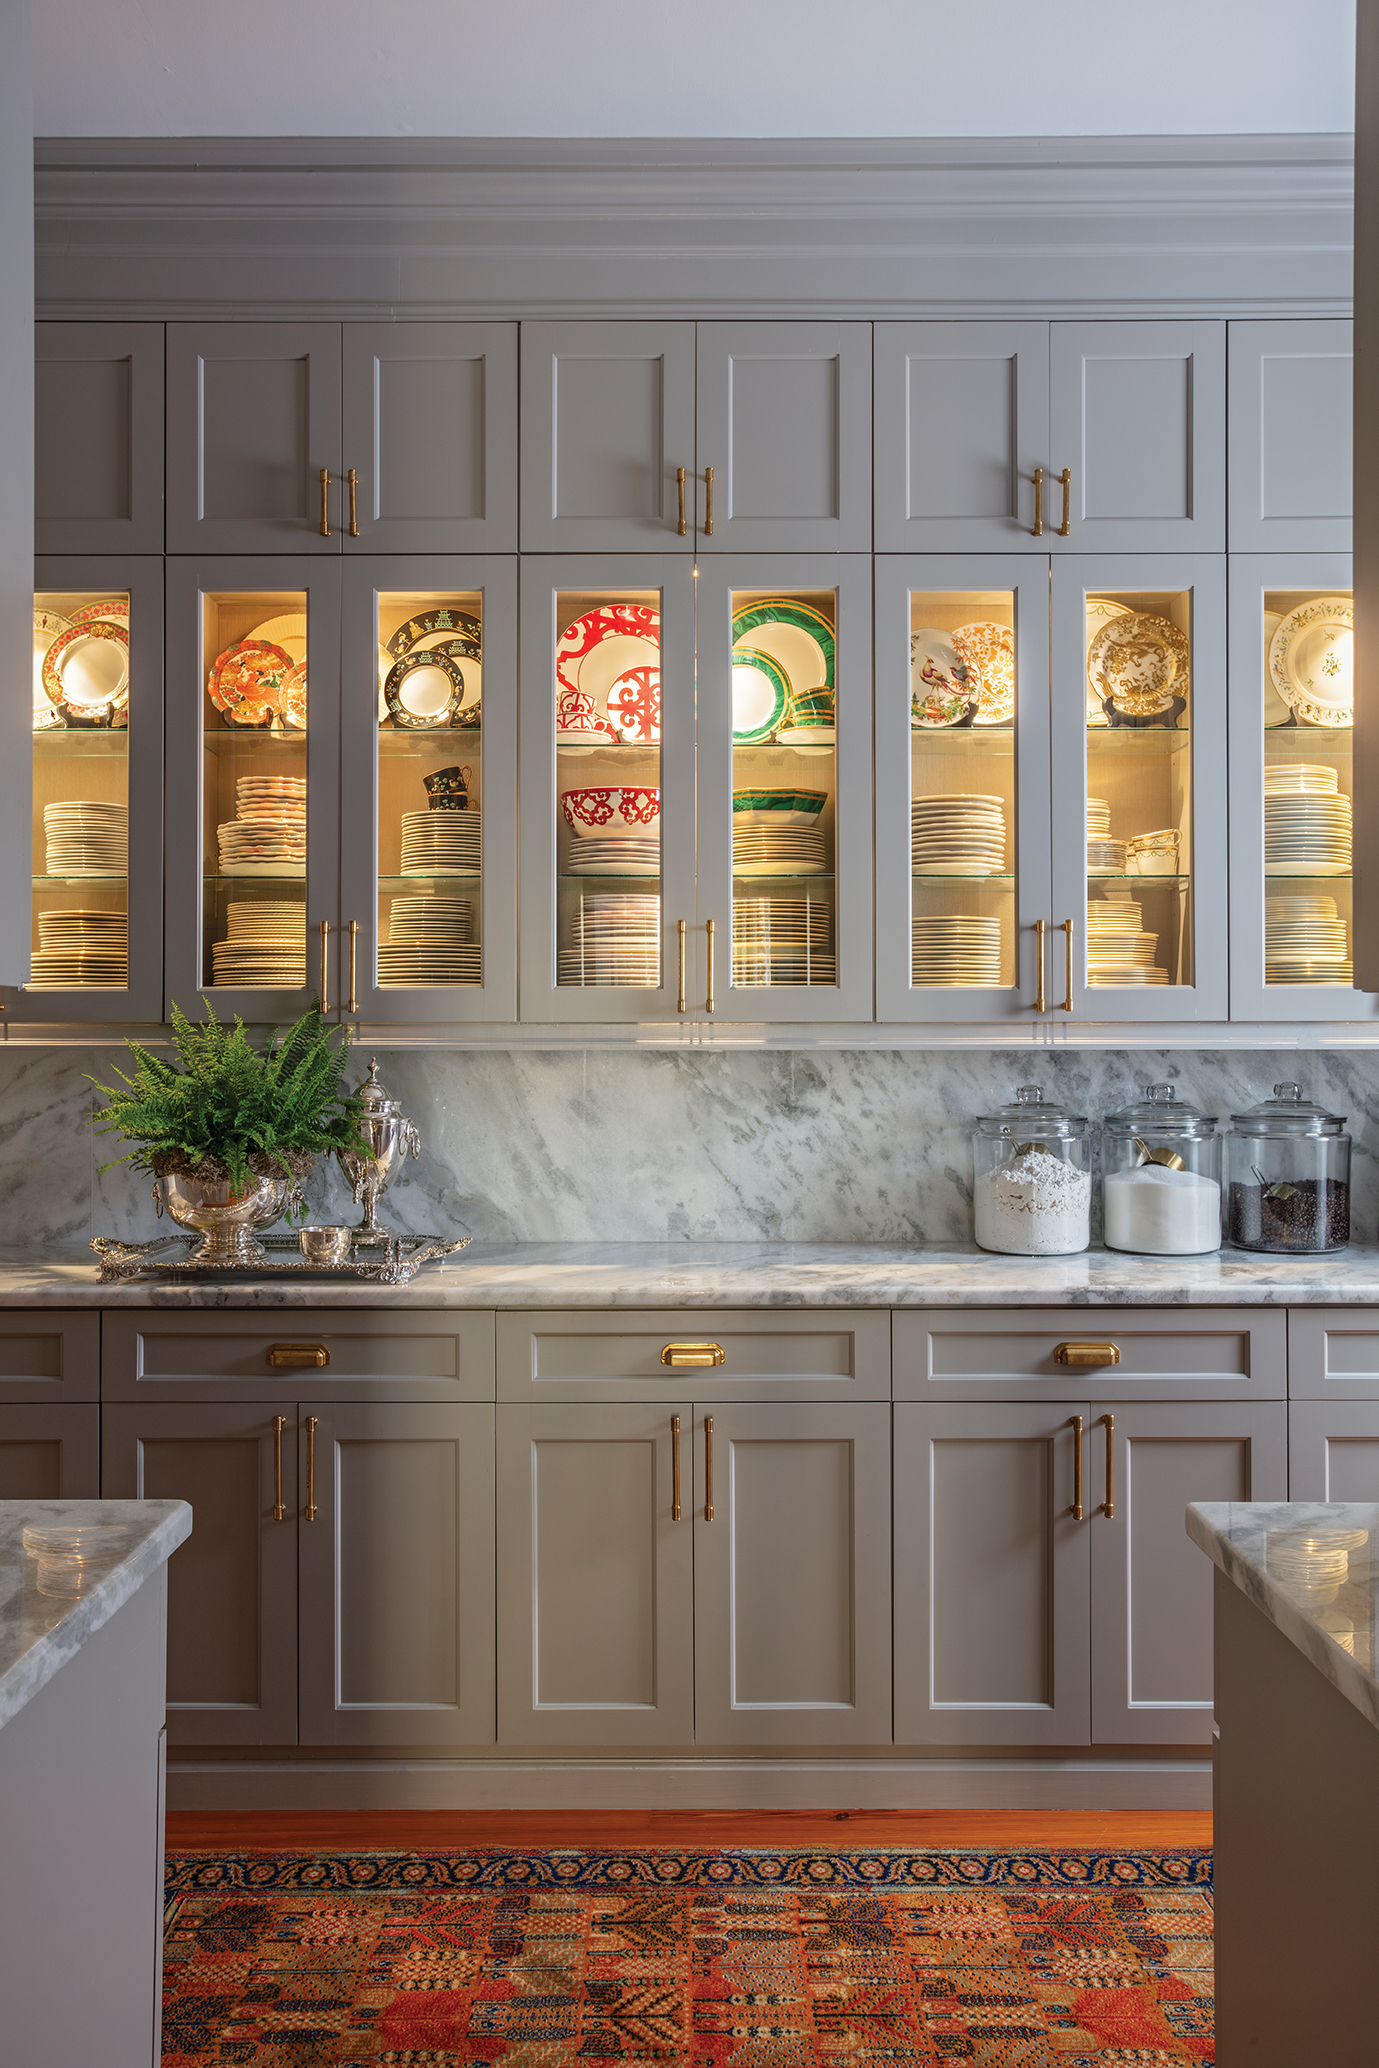 Cabinets galore and a butler’s pantry allow for uncluttered counter space. “No matter how big your house is, there’s never enough storage,” John says.